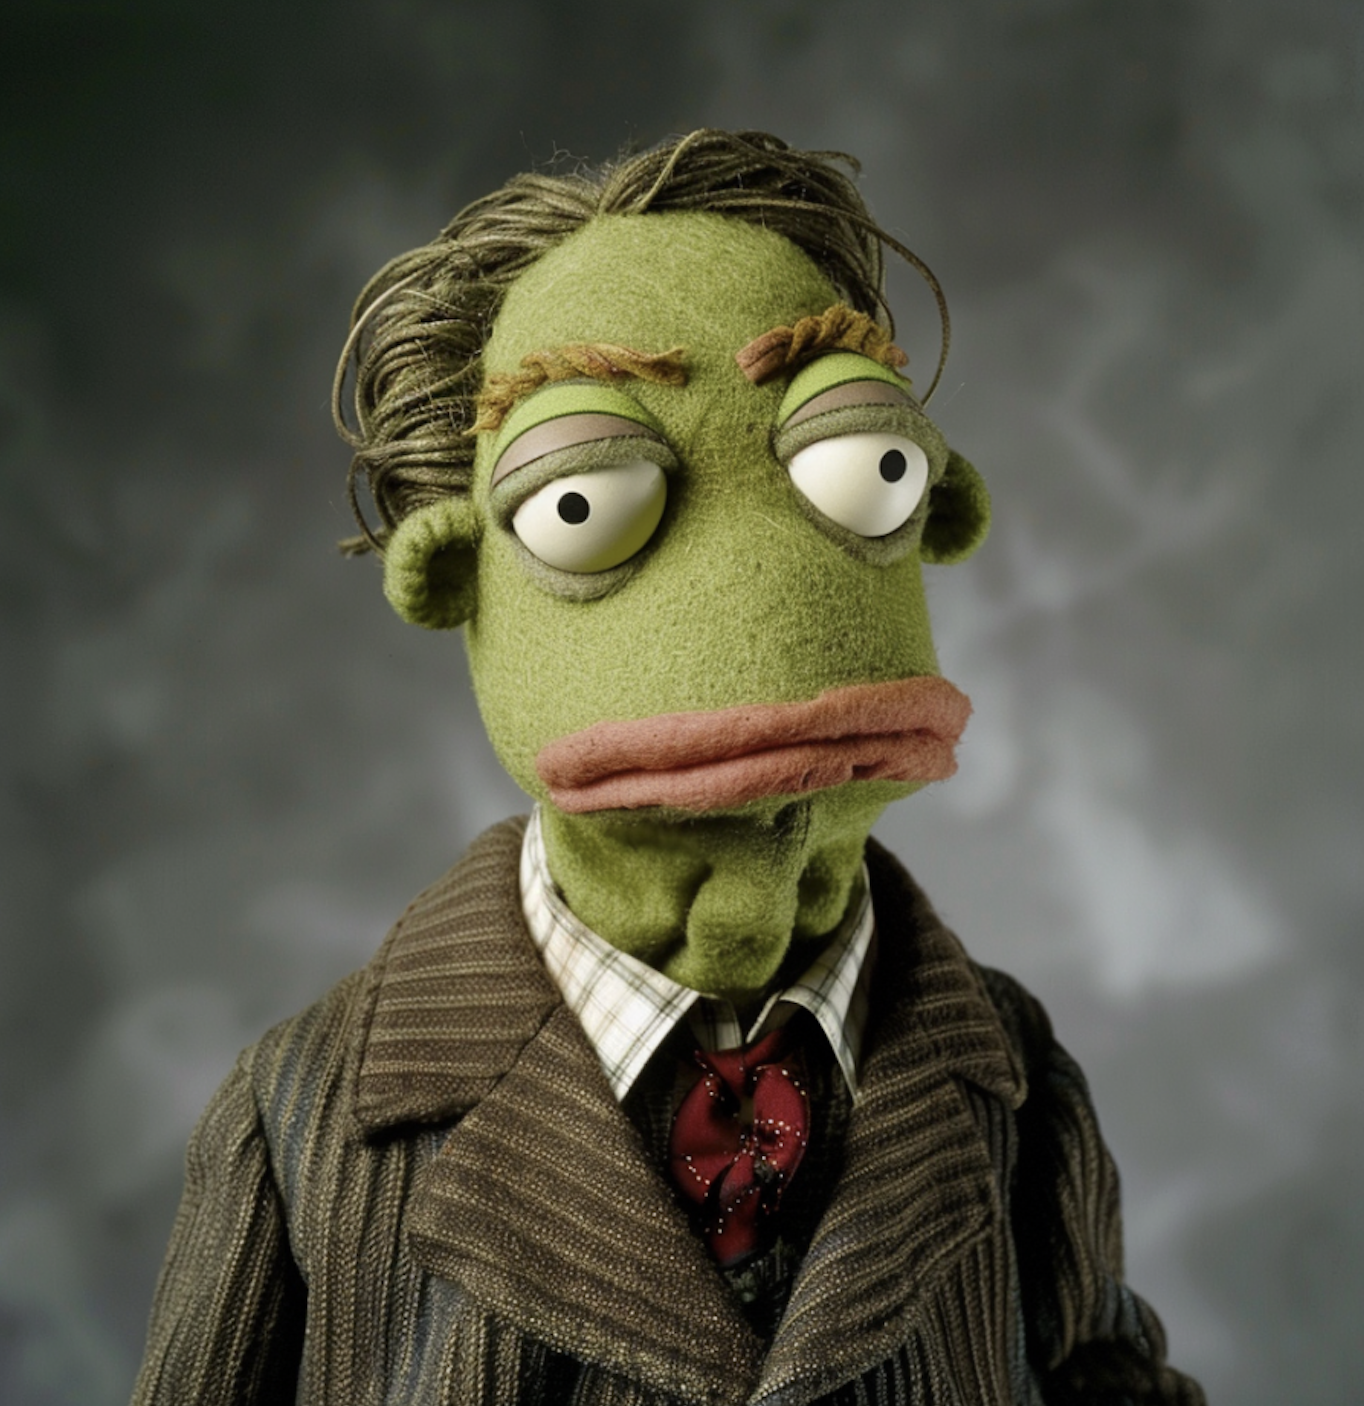 Muppet in a patterned suit and tie with wide lips, green skin, and large eyes far apart